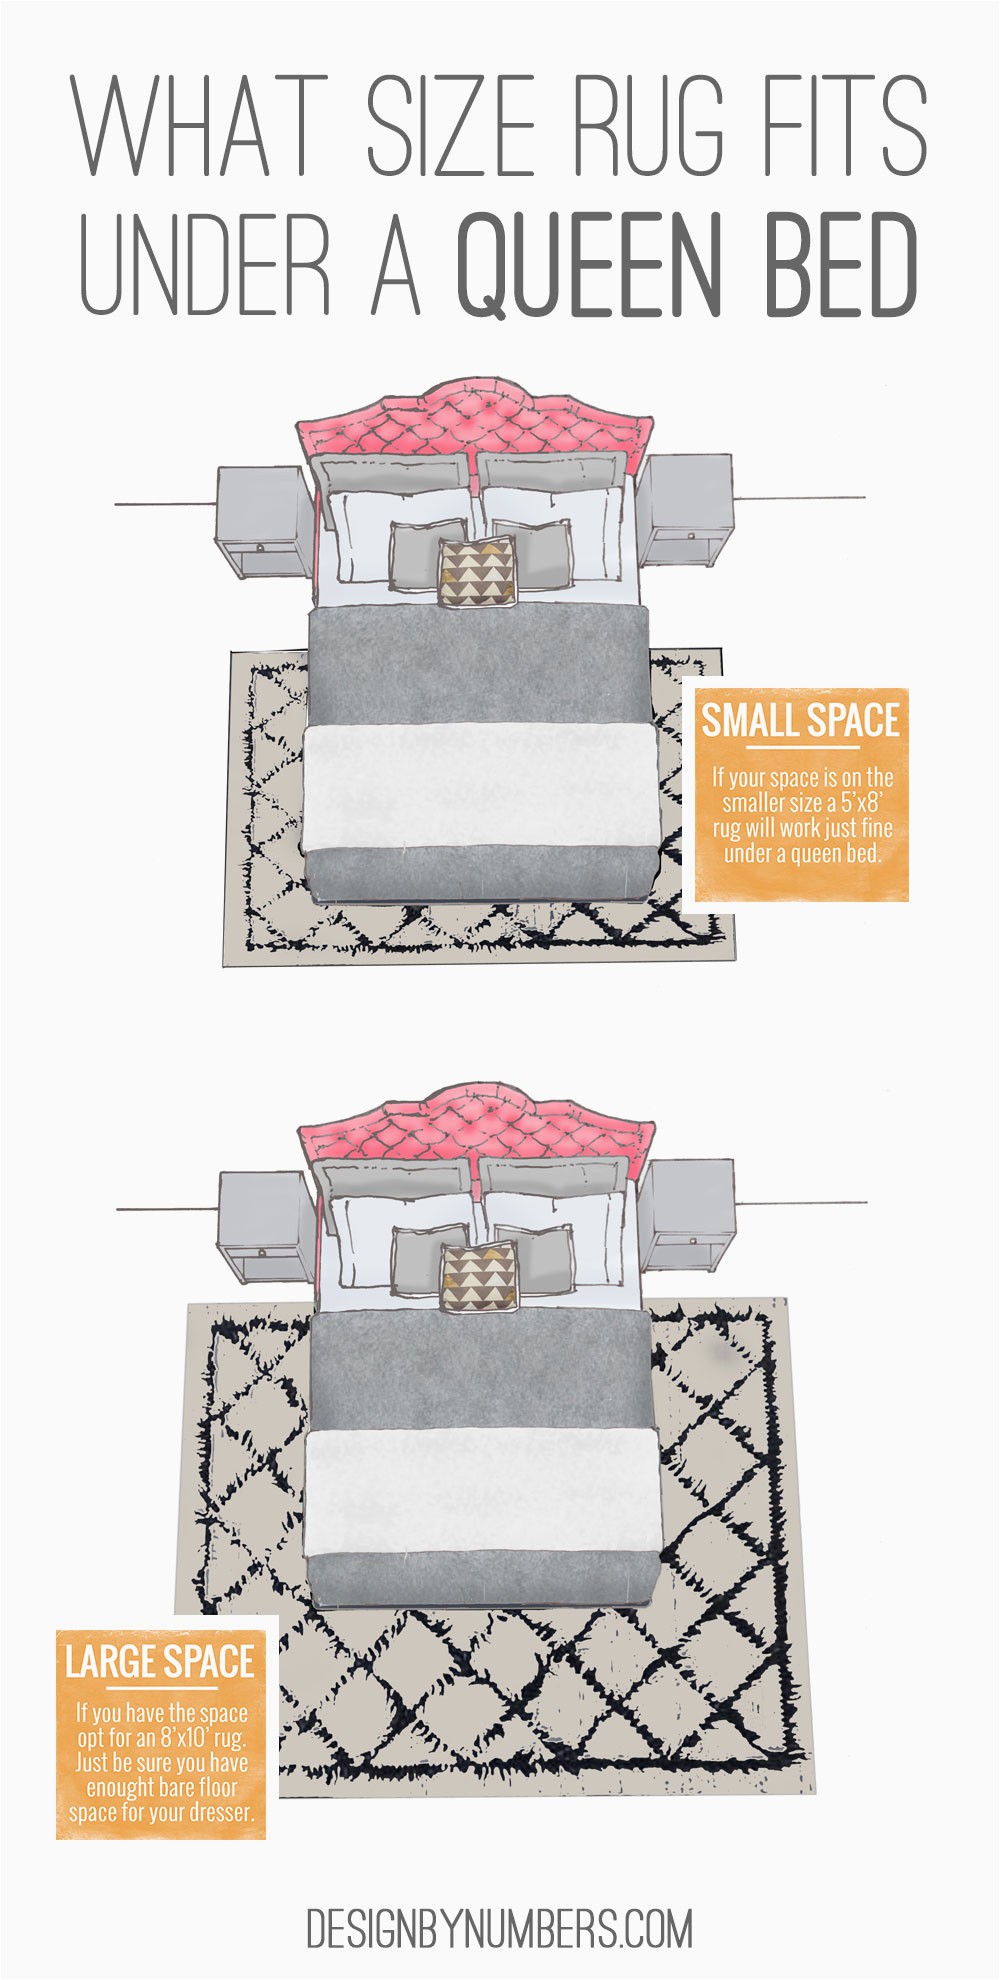 area rug sizes 11x13 rug rug size under queen bed area rugs size 9x12 determining rug size 18x30 rug what size rug for 10x12 room 14x14 rug 5 by 6 area rug 11x14 wool rug how big is 48 x 6